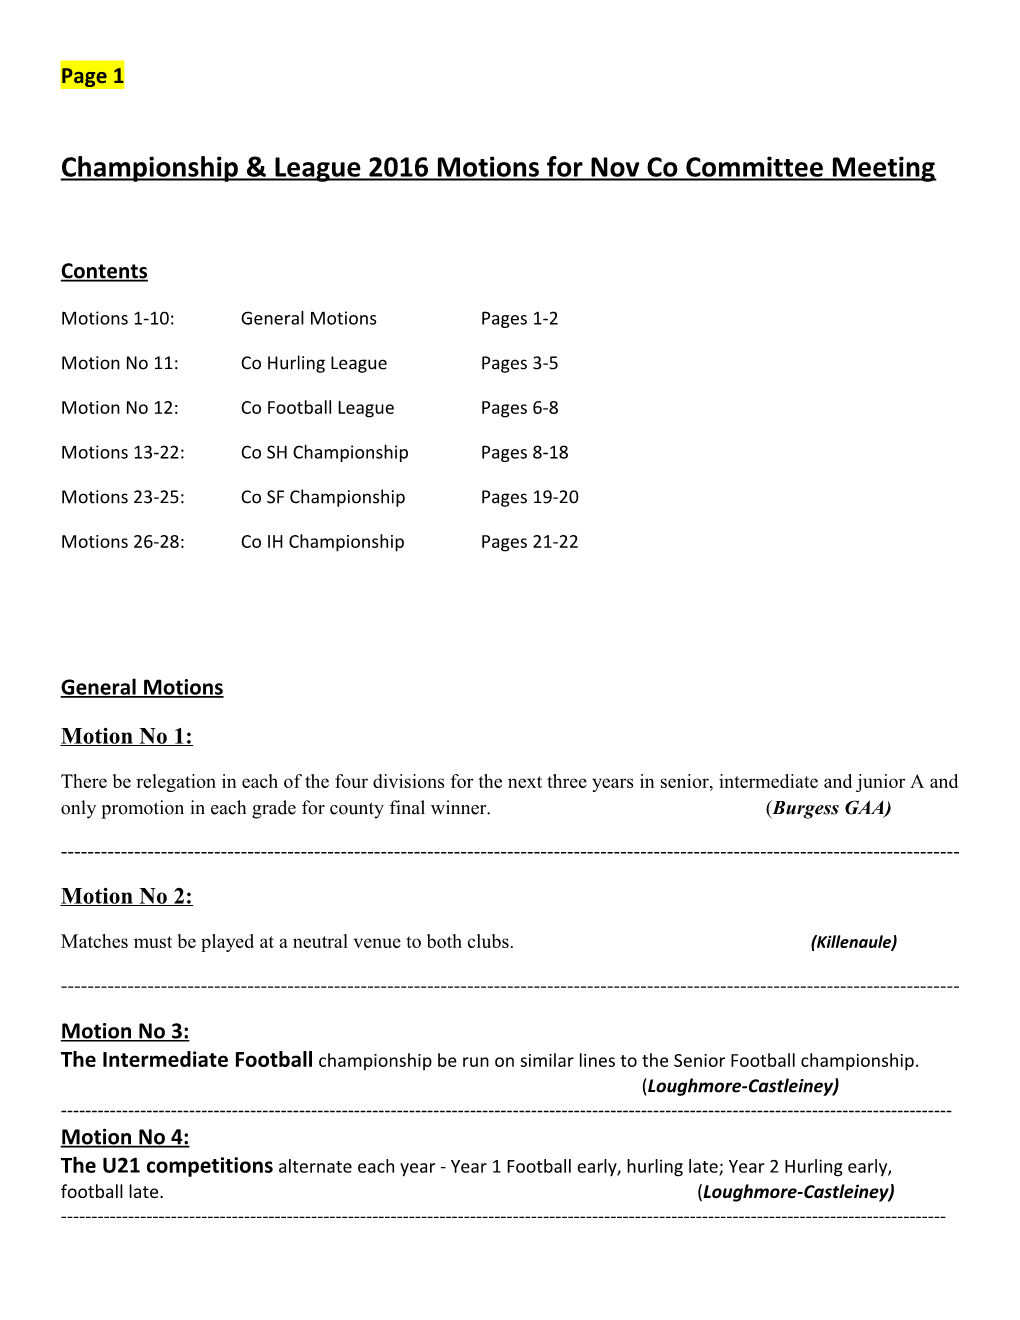 Championship & League 2016 Motions for Nov Co Committee Meeting